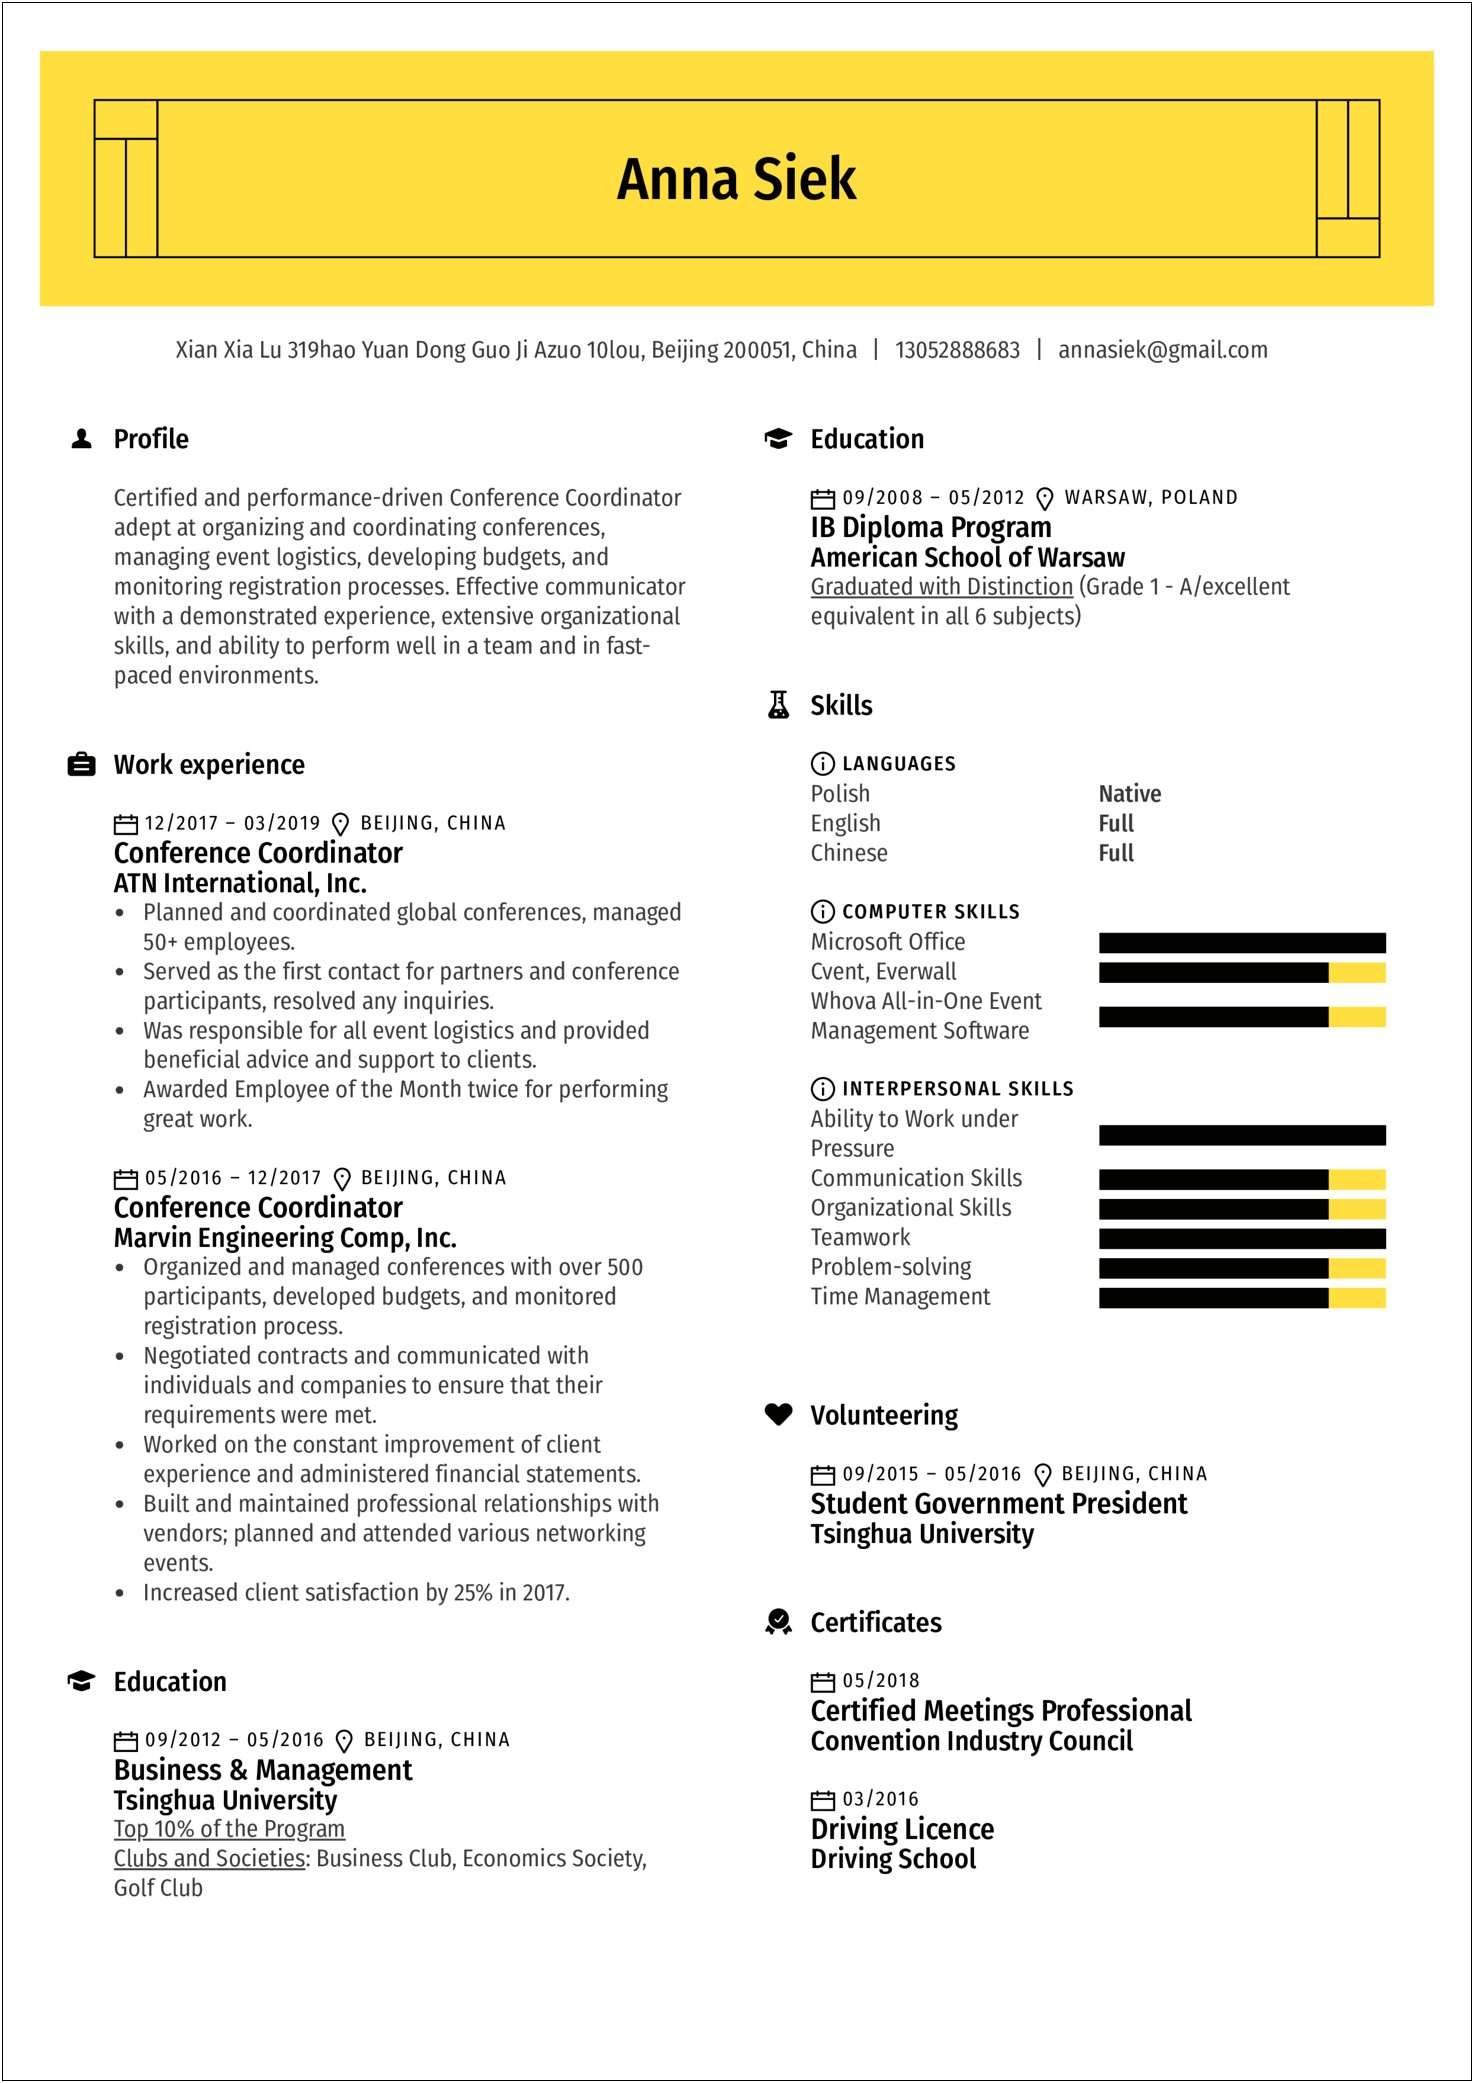 Resume 2019 Skills For Event Specialist